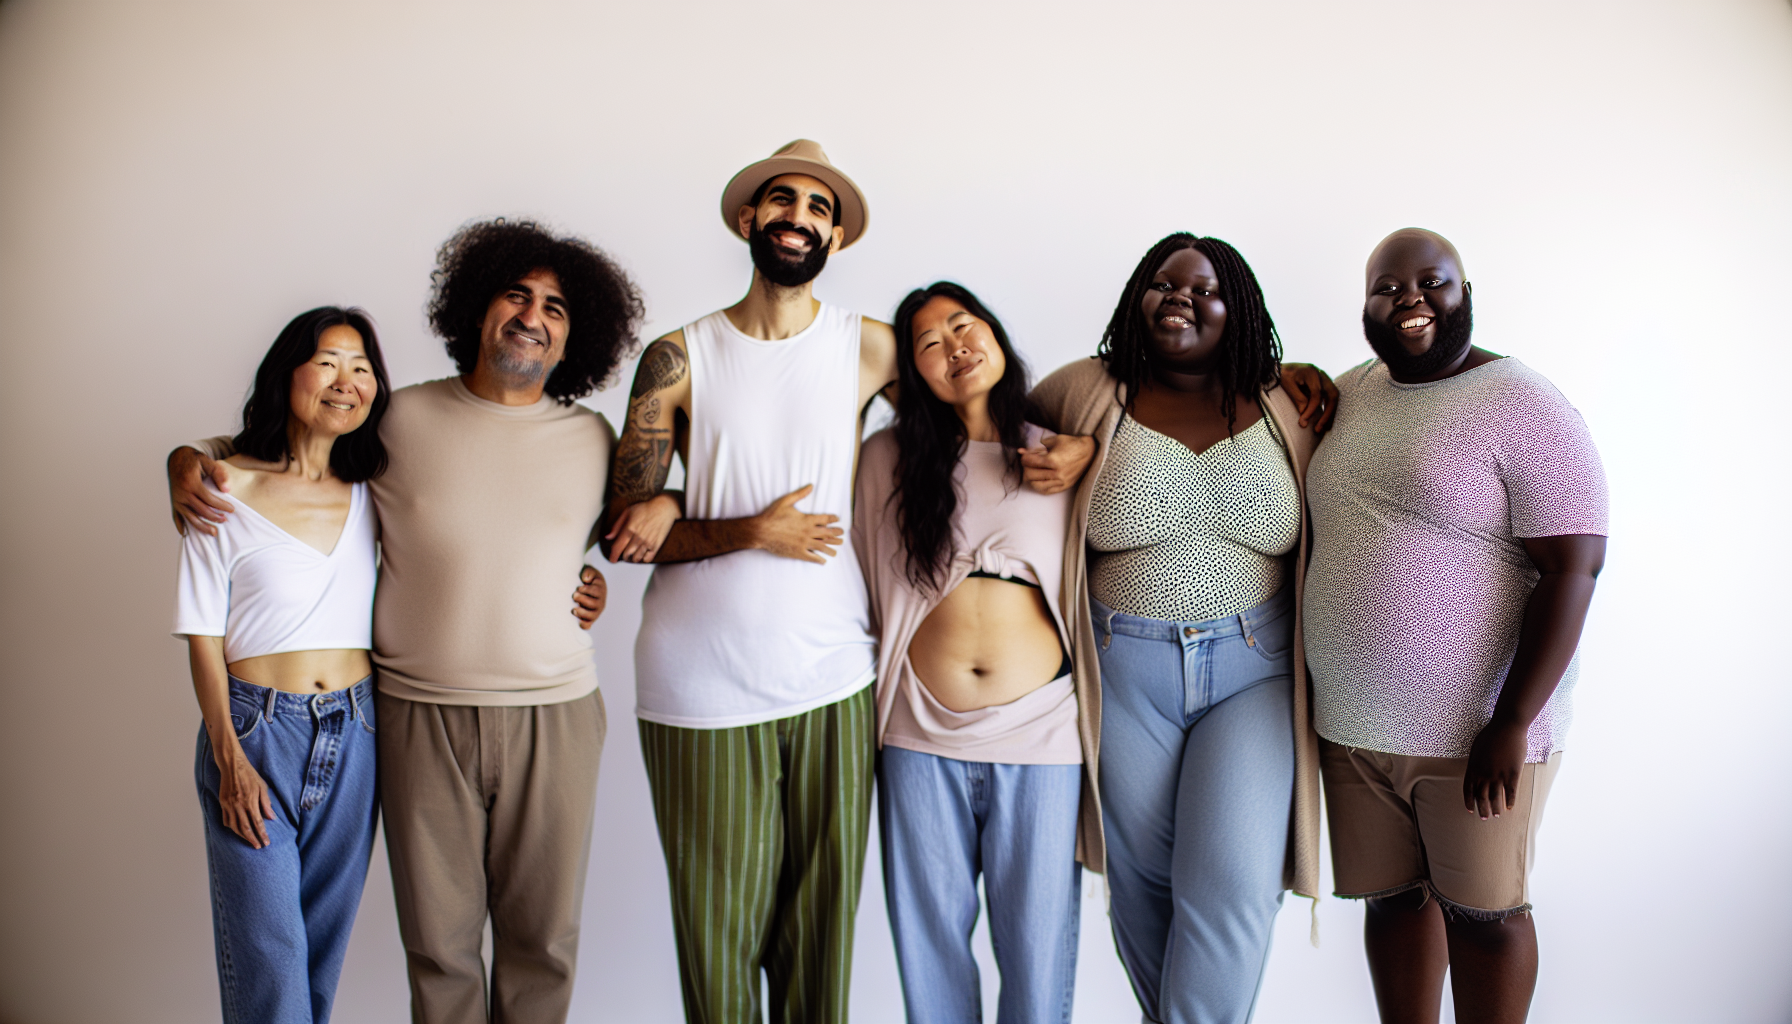 Diverse group of people embracing their bodies and smiling